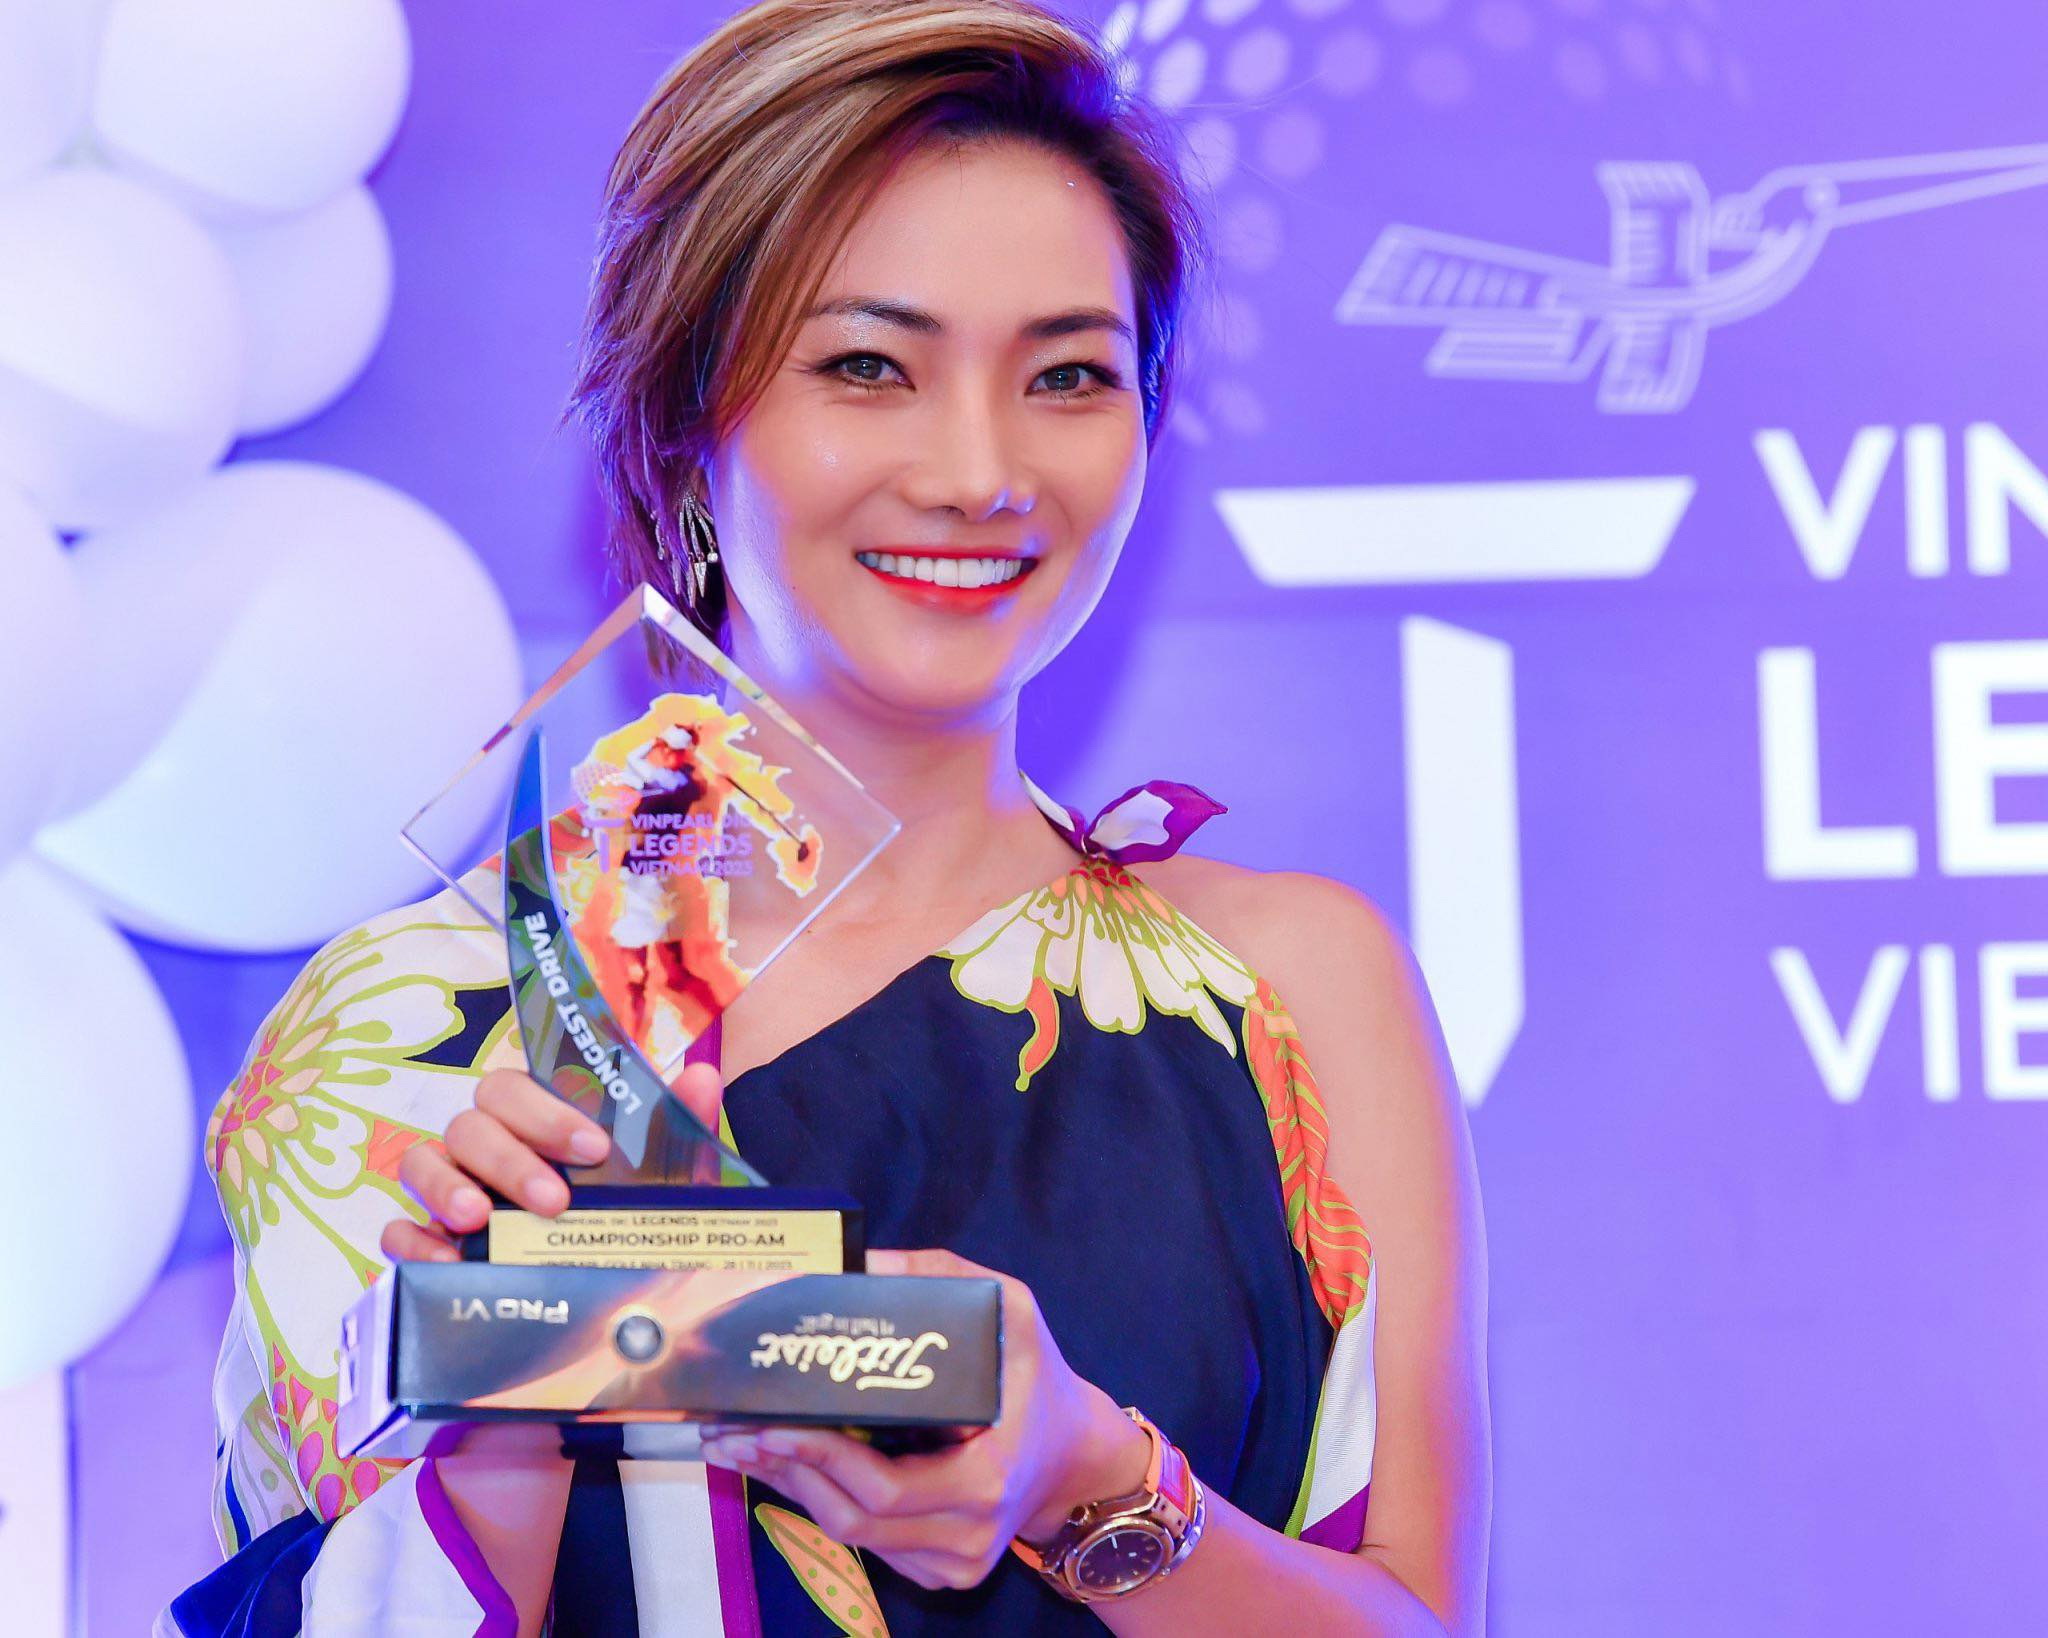 Nguyễn Gia Bảo with the "Longest shot" award on Pro - Am competition day.